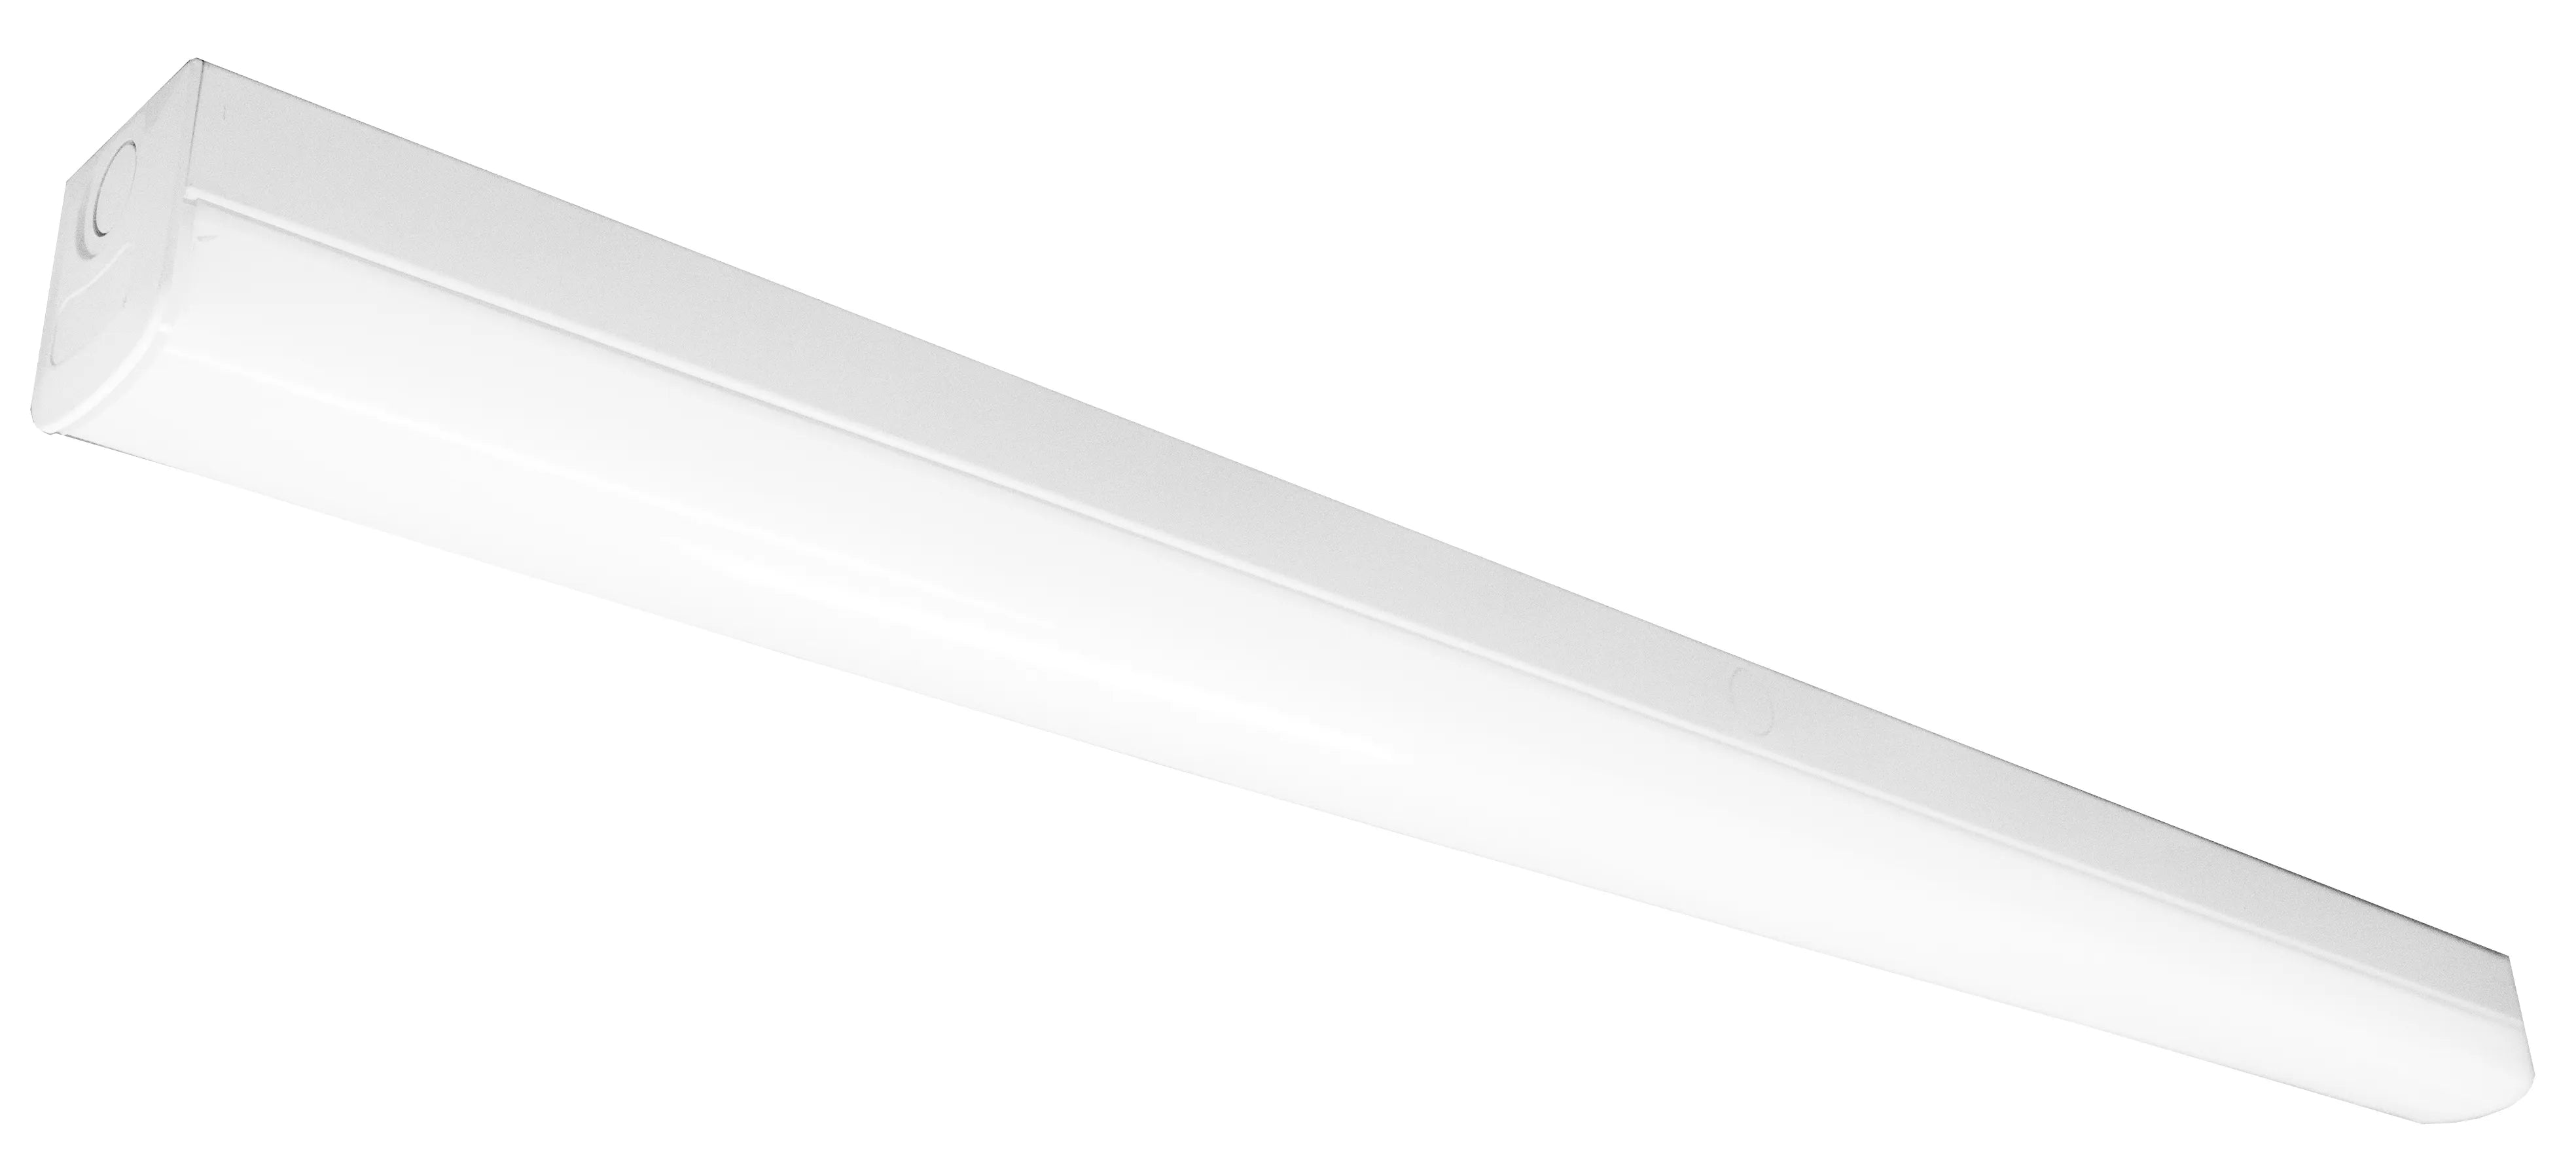 2 to 8 ft. 20W to 90W High-Lumen CCT & Power Adjustable Linear Strip Light - White or Black FInish